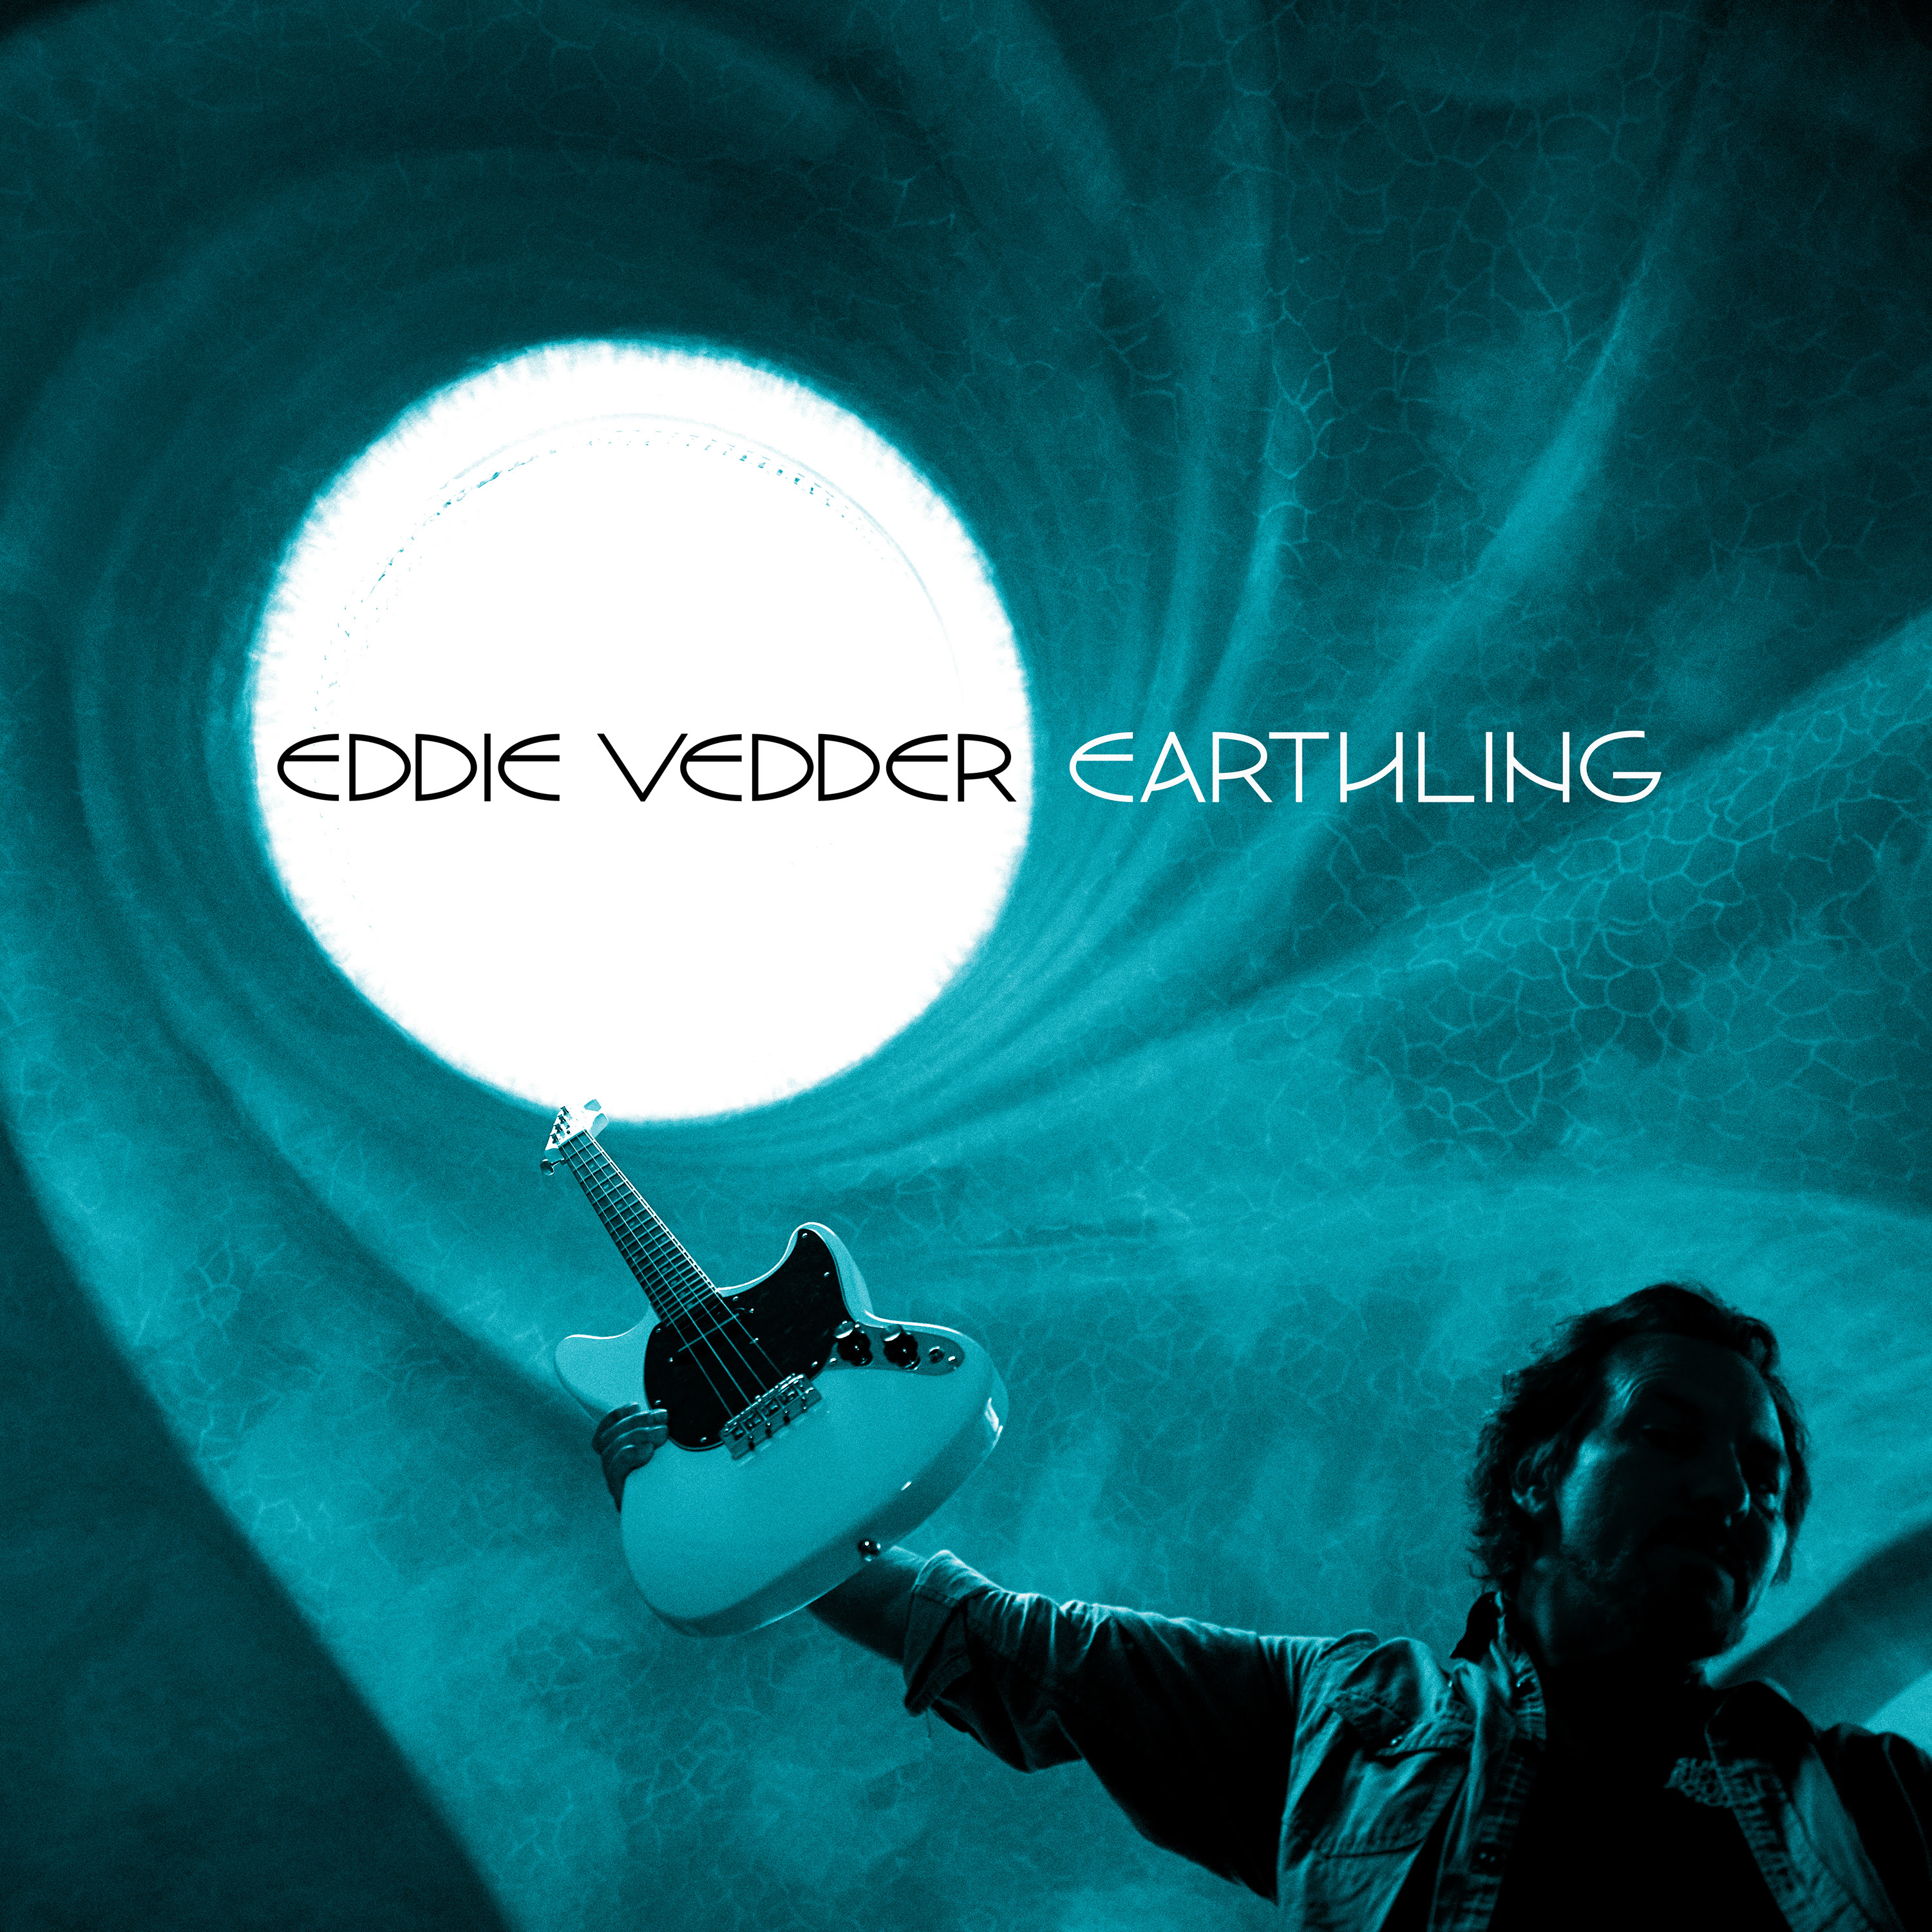 EDDIE VEDDER UNVEILS NEW SINGLE “BROTHER THE CLOUD”